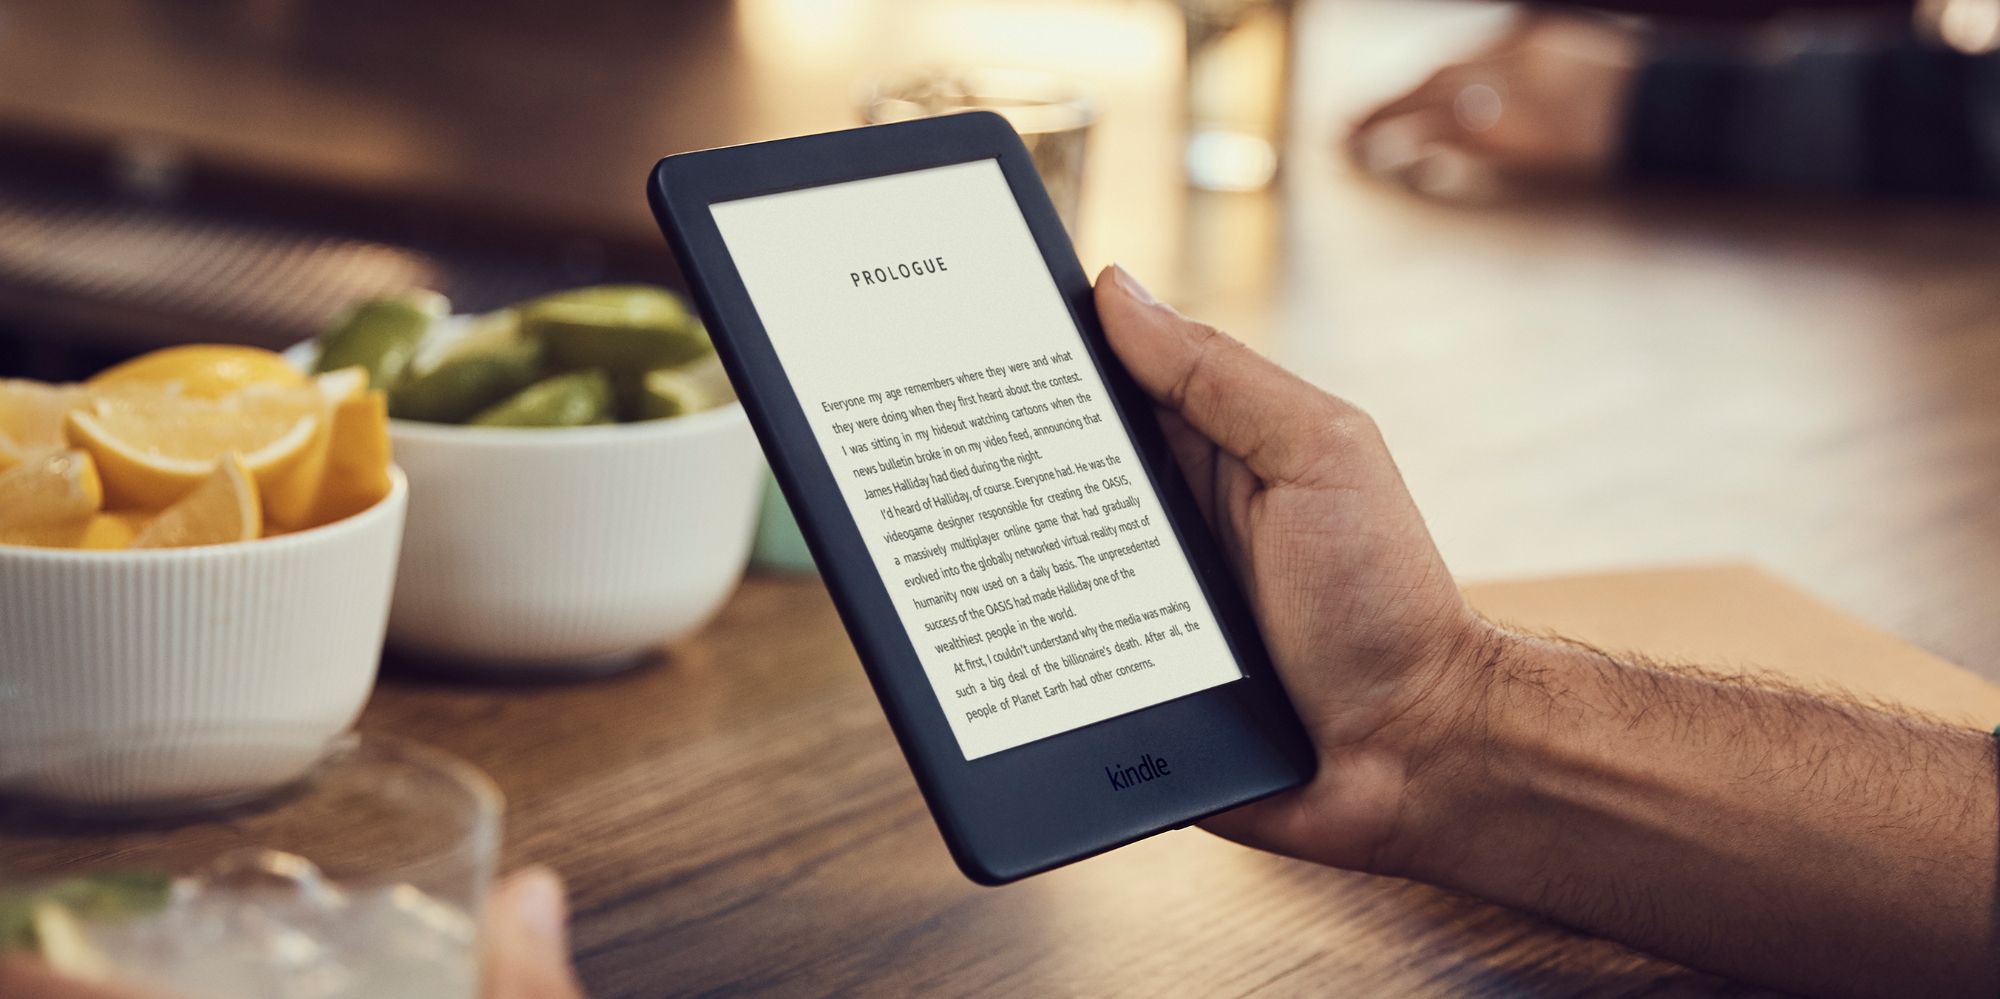 How To Delete Books From Your Amazon Kindle (And When You Should)